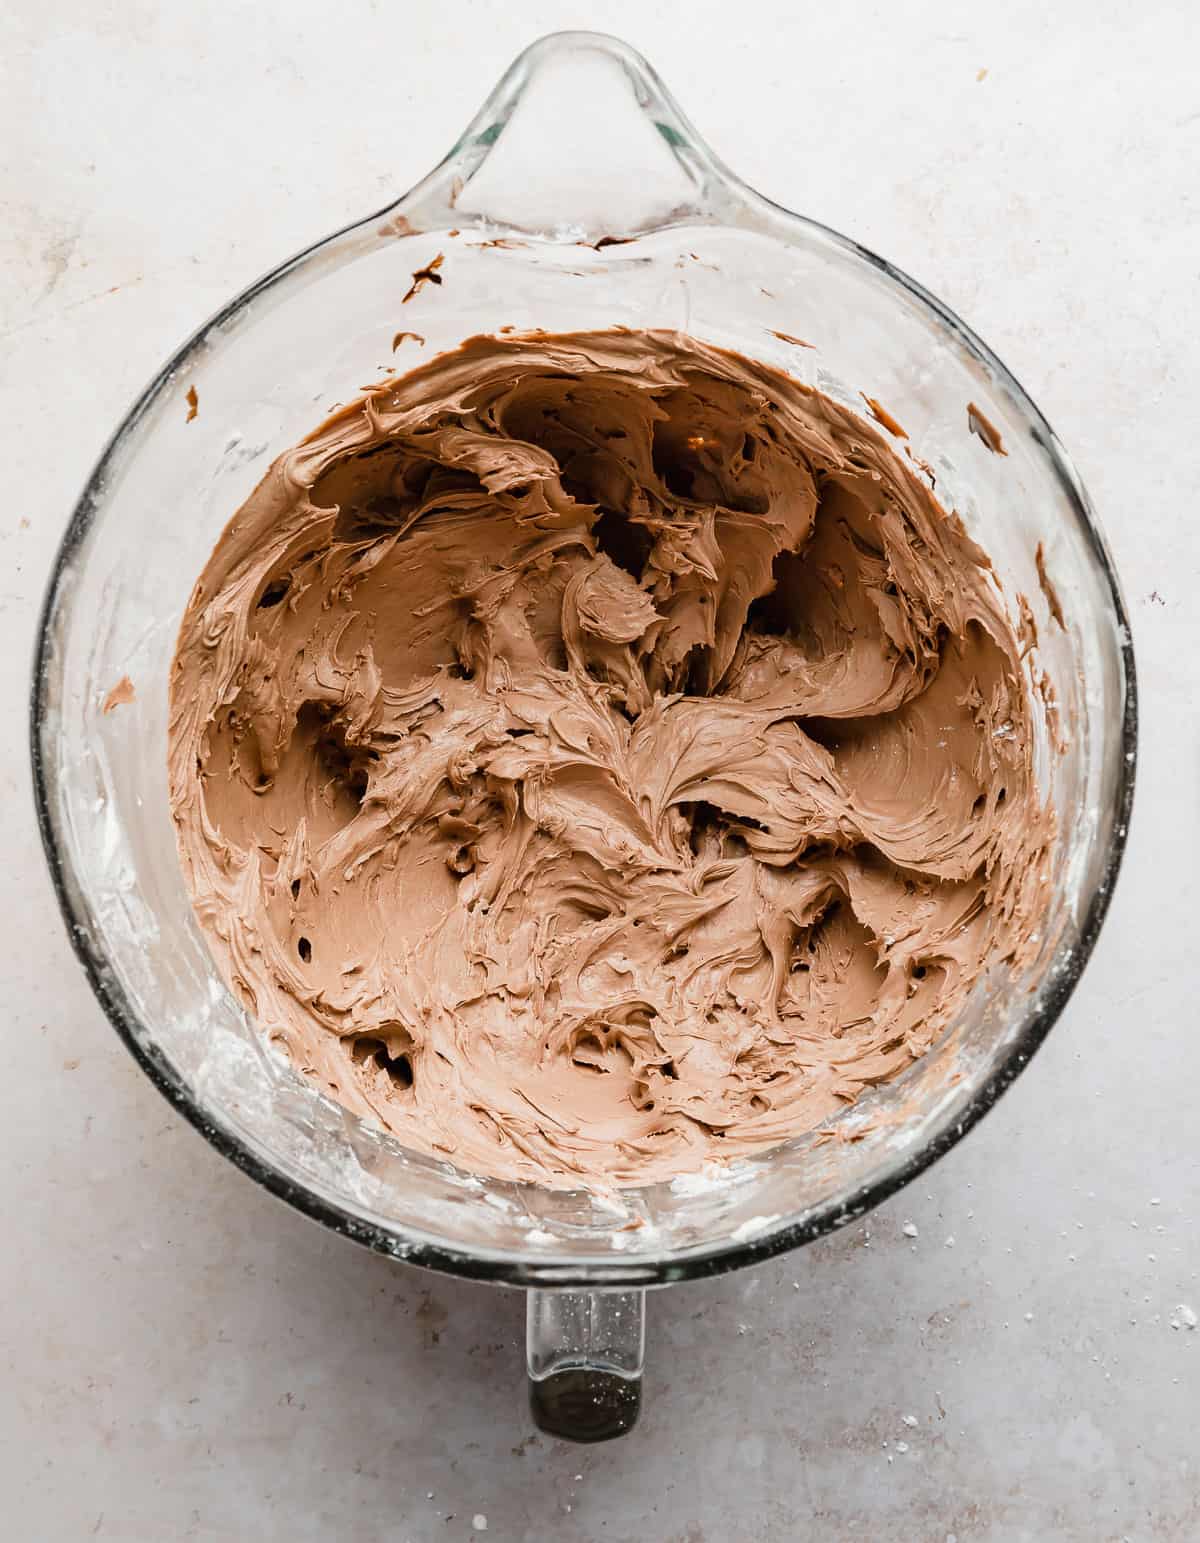 Chocolate Buttercream Frosting made with Melted Chocolate in a glass bowl on a white background.